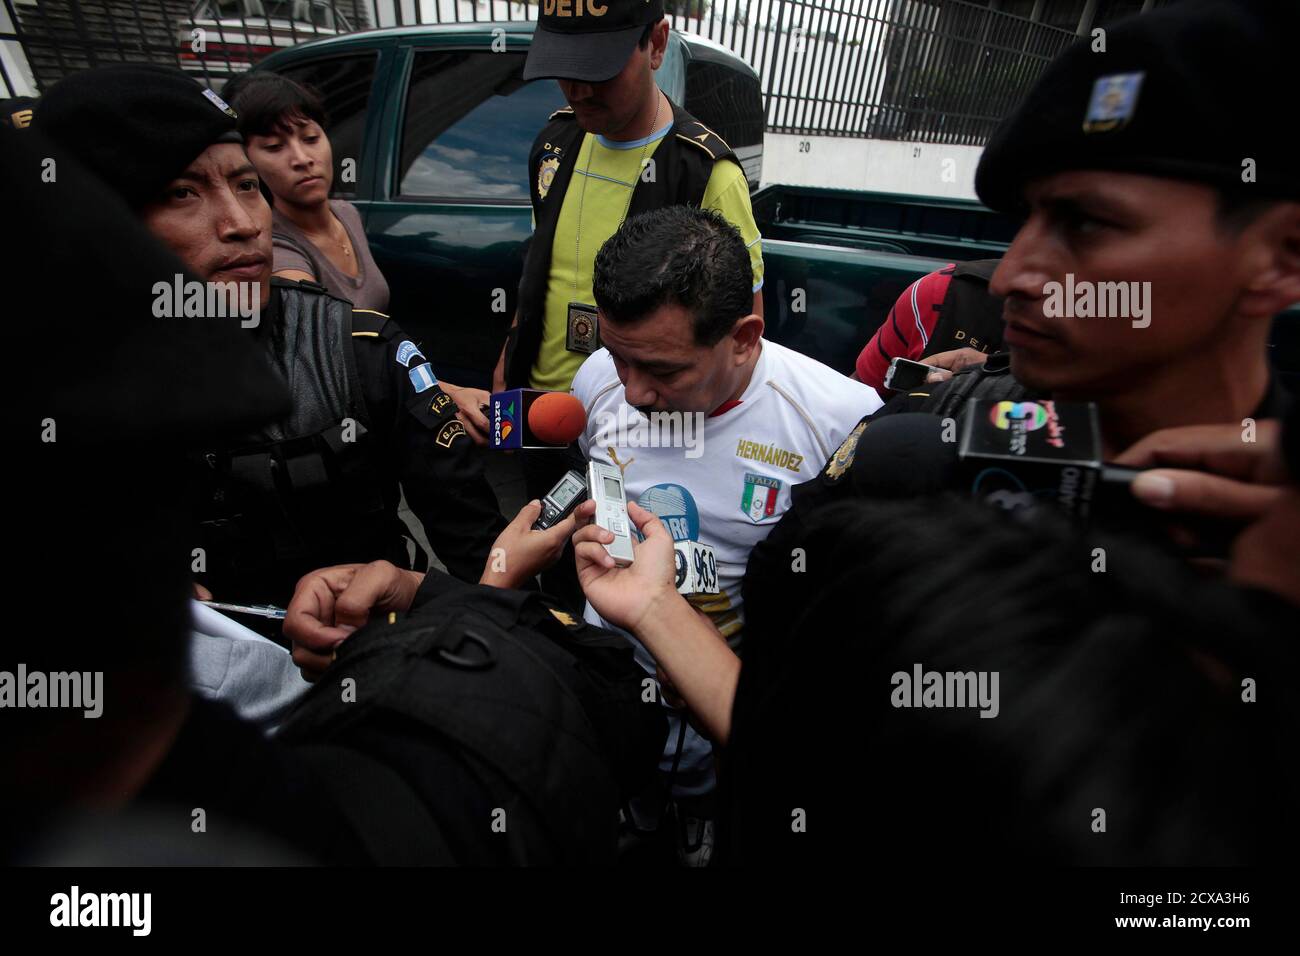 Police escort Juan Hernandez Sanchez (C), a suspect in the murder of Argentine folk singer Facundo Cabral, in Guatemala City July 31, 2011. Cabral was killed on July 9, 2011 while on the way to the airport in Guatemala City when gunmen opened fire on the car he was in as part of a plot by organized crime gangs to kill his music promoter Henry Farina. Farina, who was driving the car at the time of the shooting, was badly injured. Hernandez Sanchez, 45, is the third man to be detained in connection with the case when he was arrested on Sunday in Aldea Aceituno in the Escuintla region while in th Stock Photo